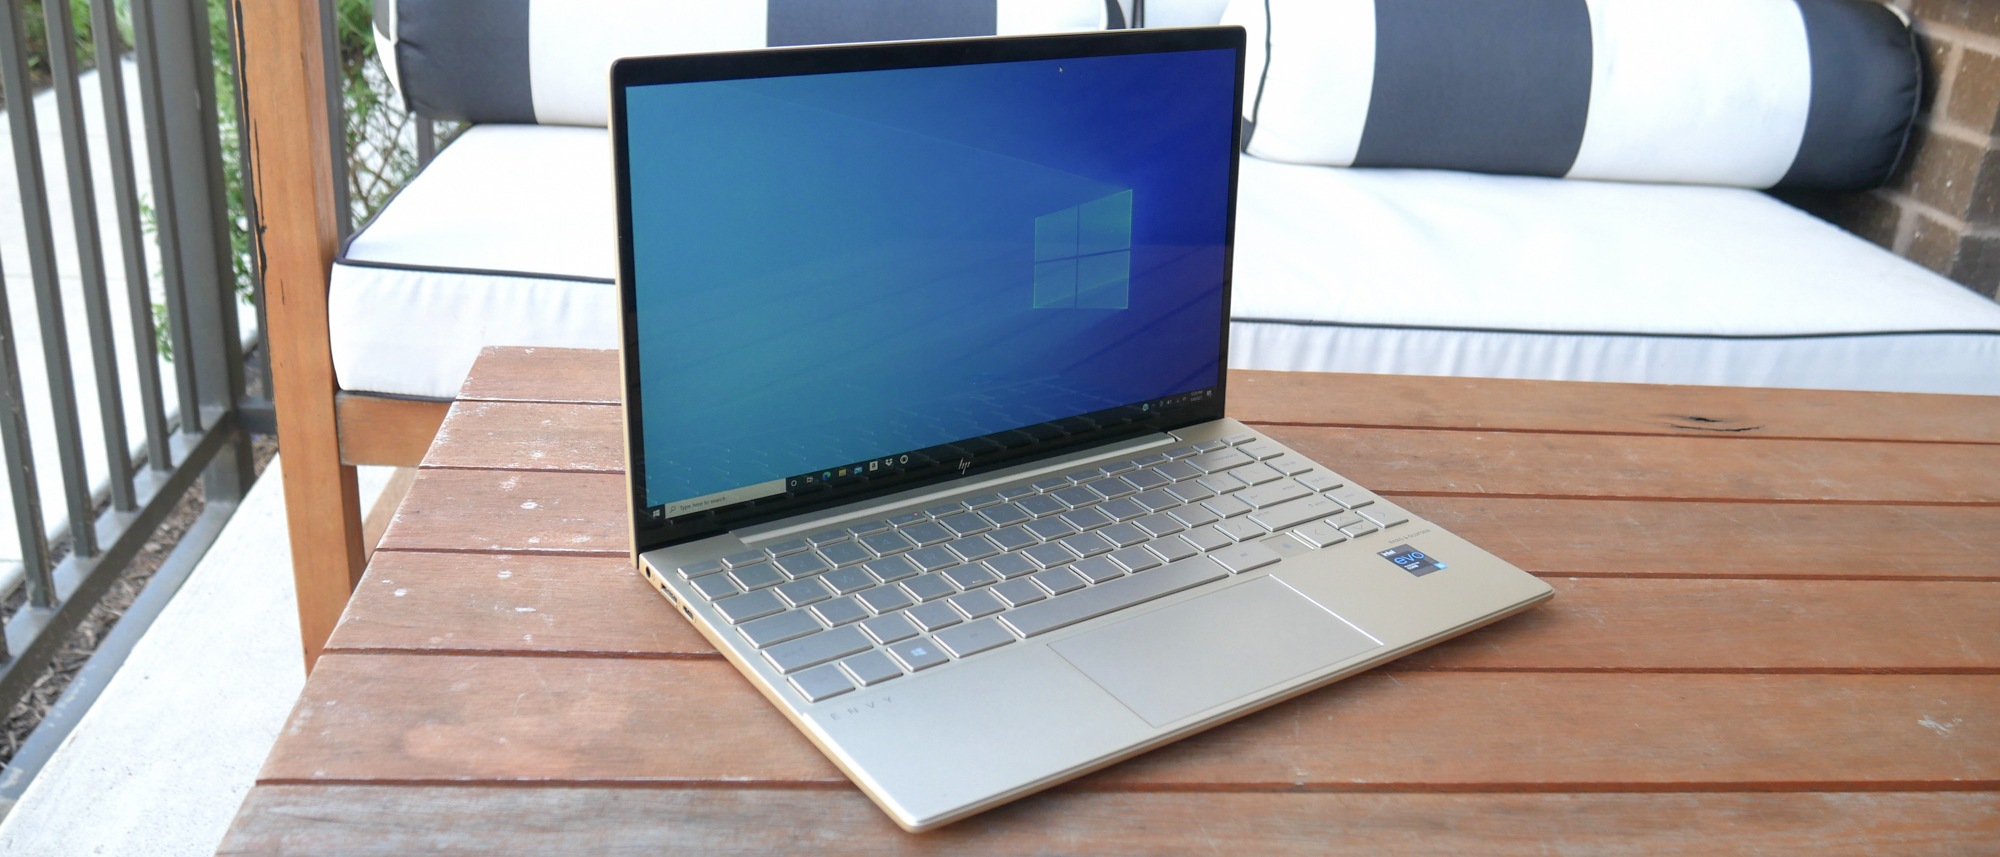 HP® ENVY Laptops: A Complete Review